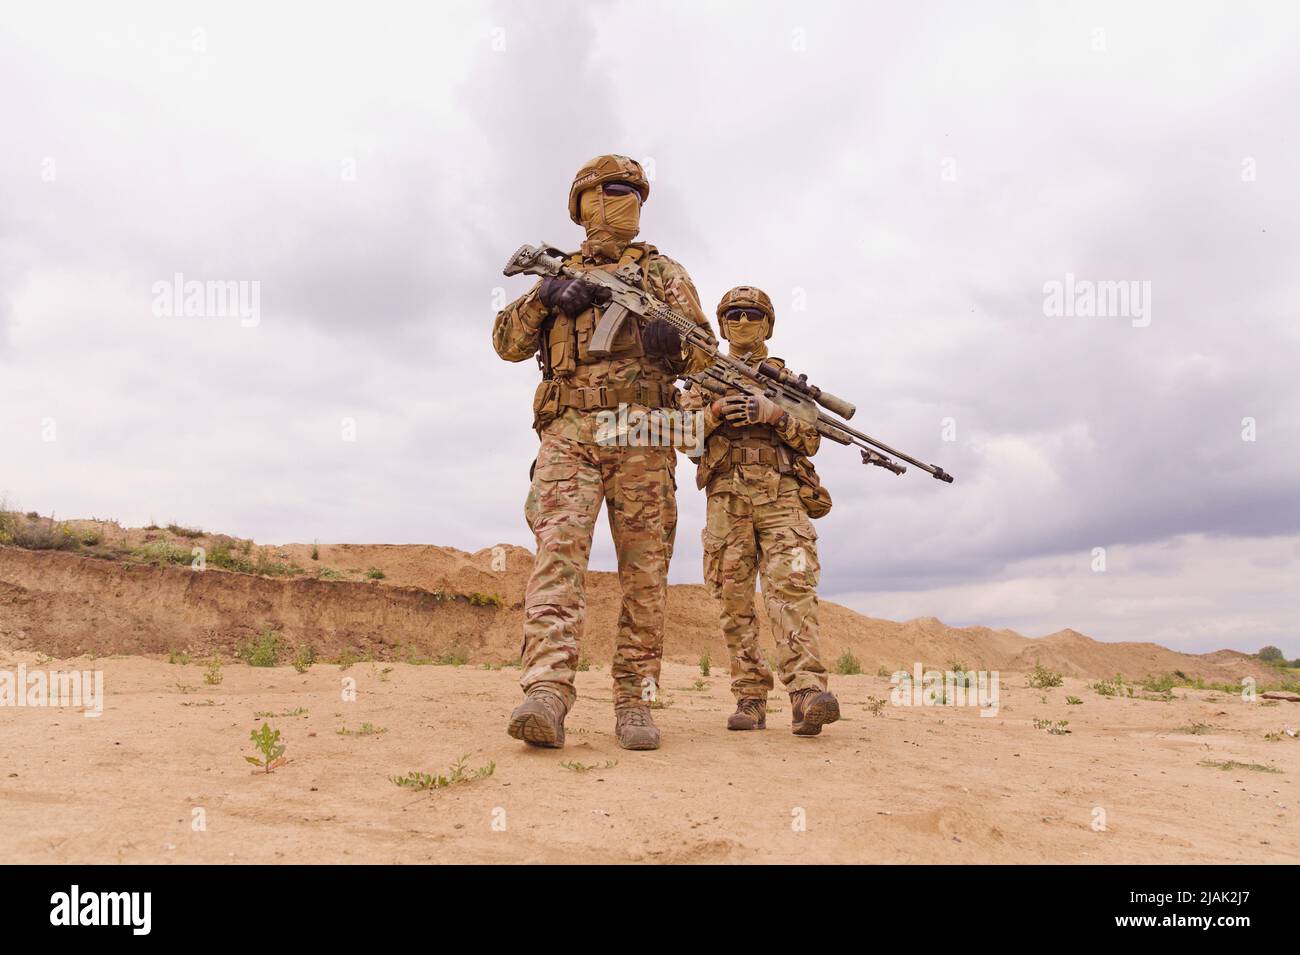 Two special forces rangers during a military operation in the desert. Stock Photo